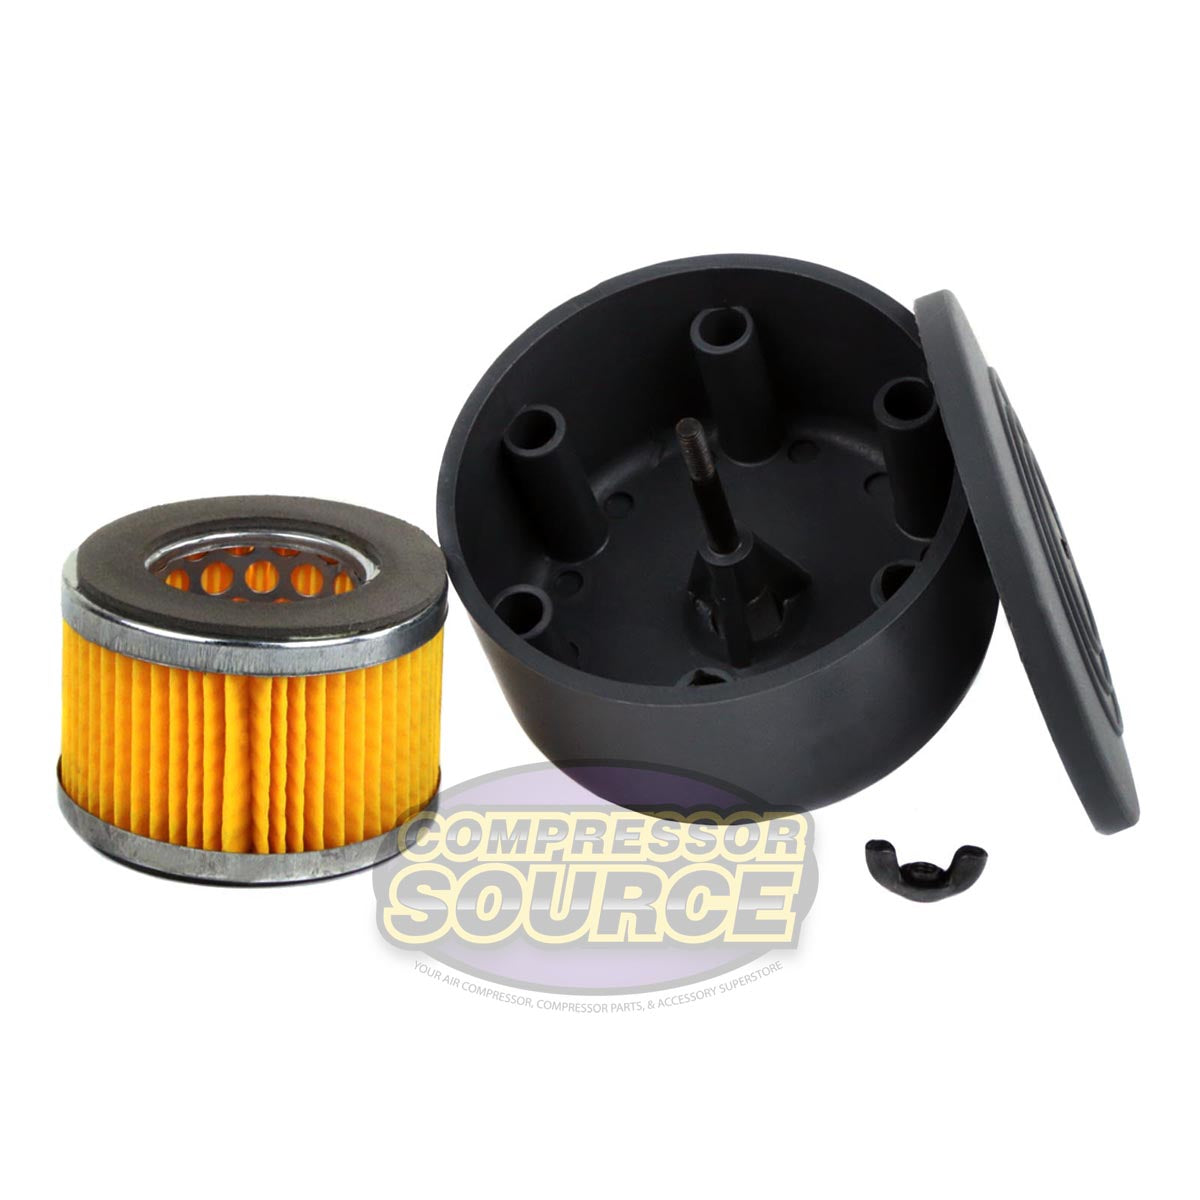 3/4" Replacement Puma Air Compressor Intake Filter and Housing